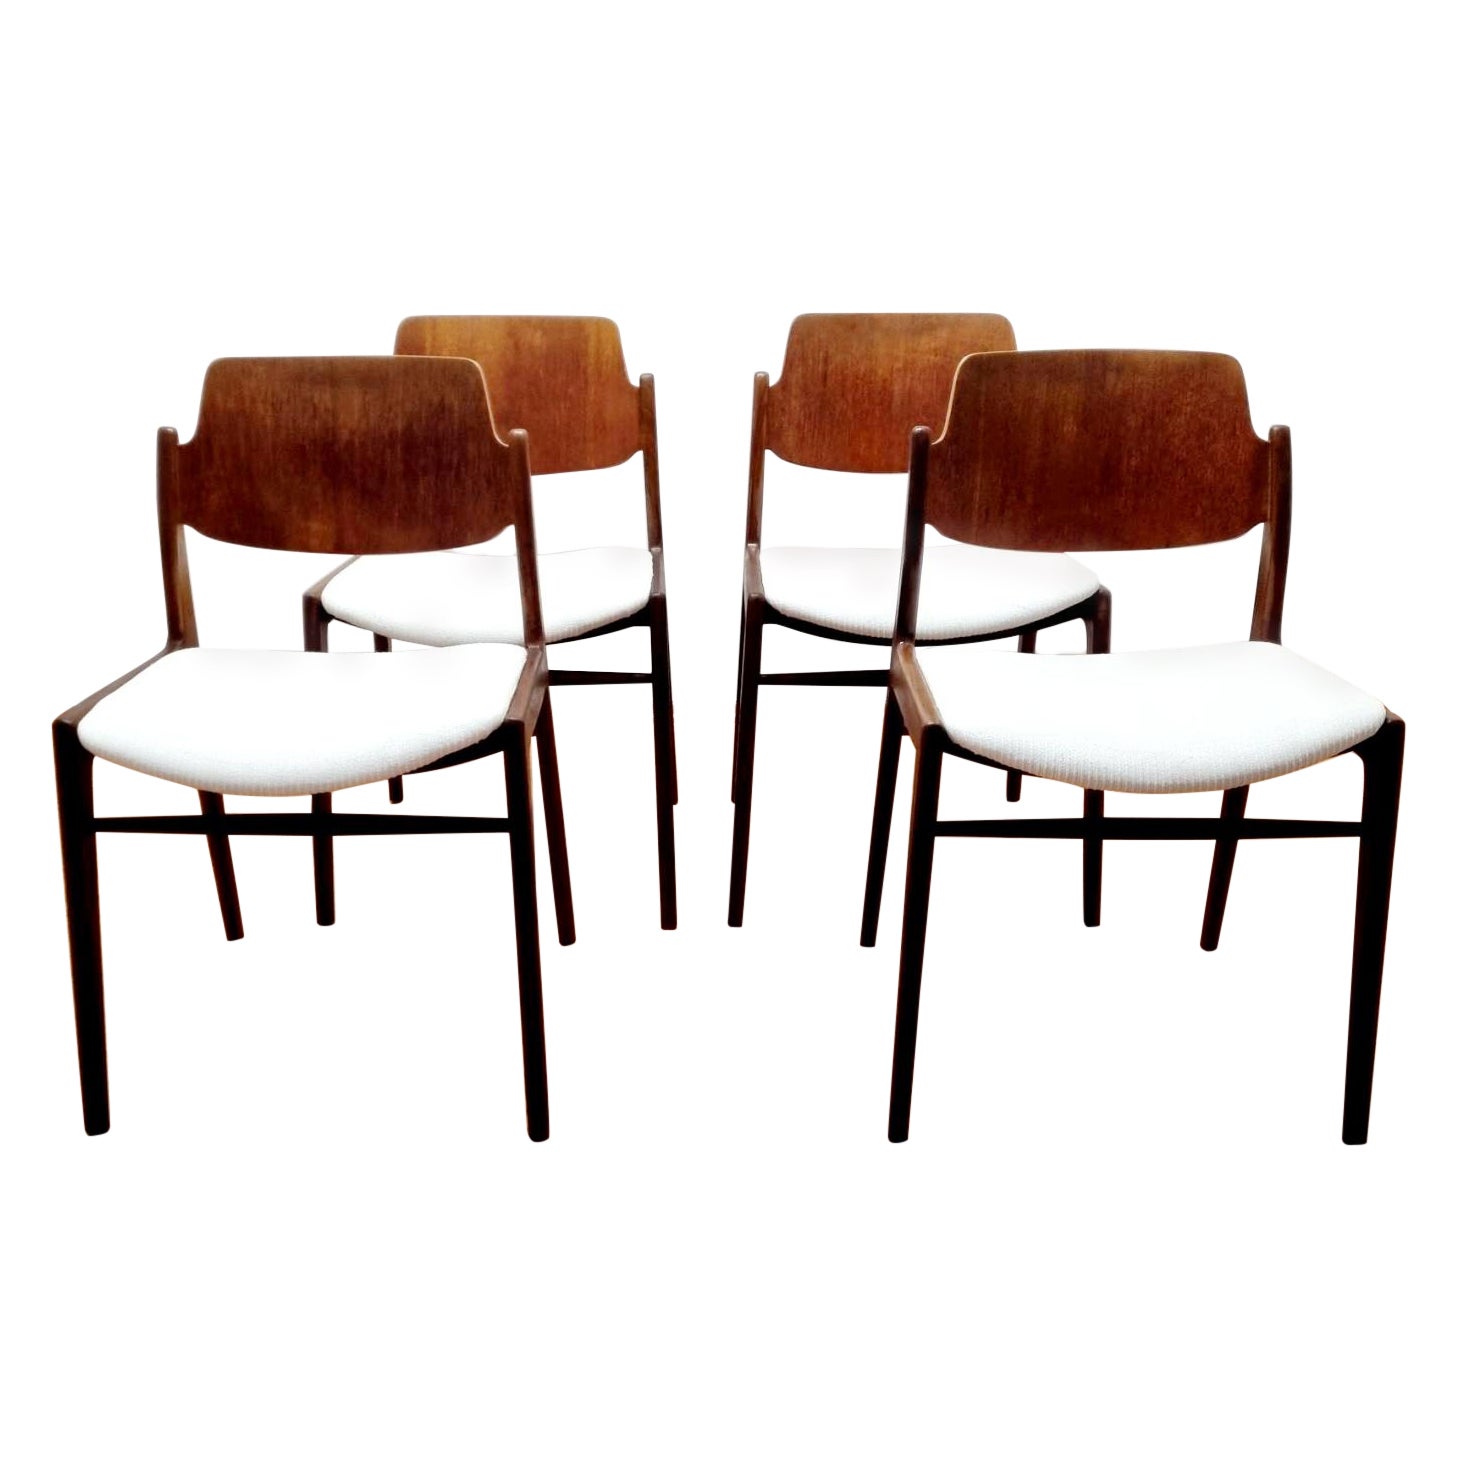 Dining Chairs By Hartmut Lohmeyer For Wilkhahn, Germany 60s For Sale